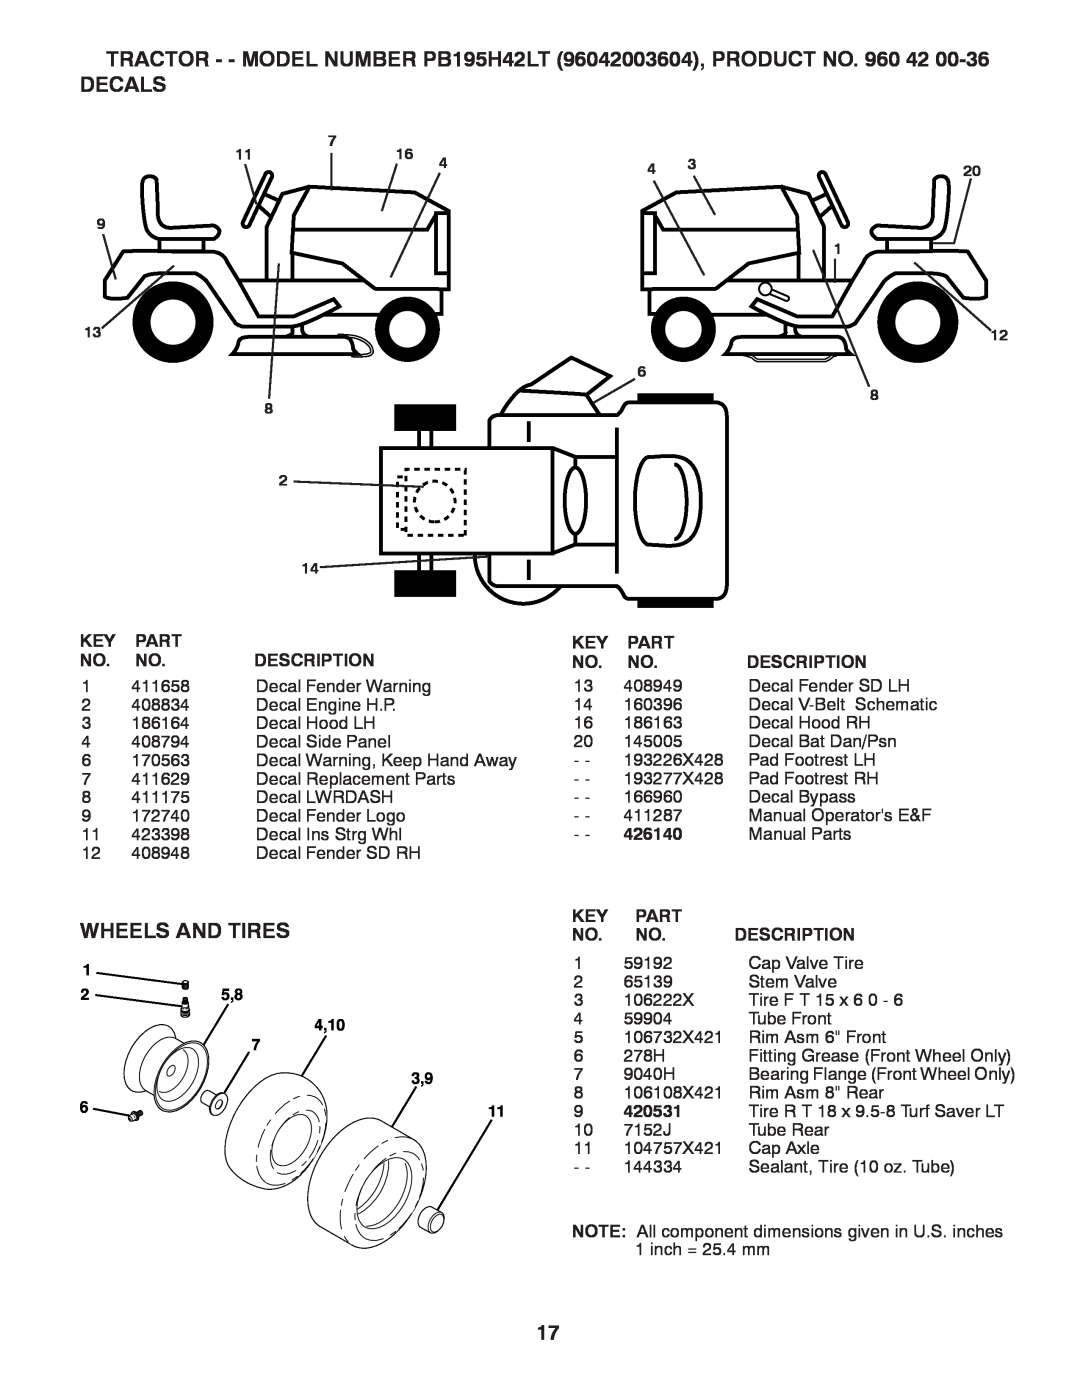 Poulan 426140, 96042003603 manual Decals, Wheels And Tires 